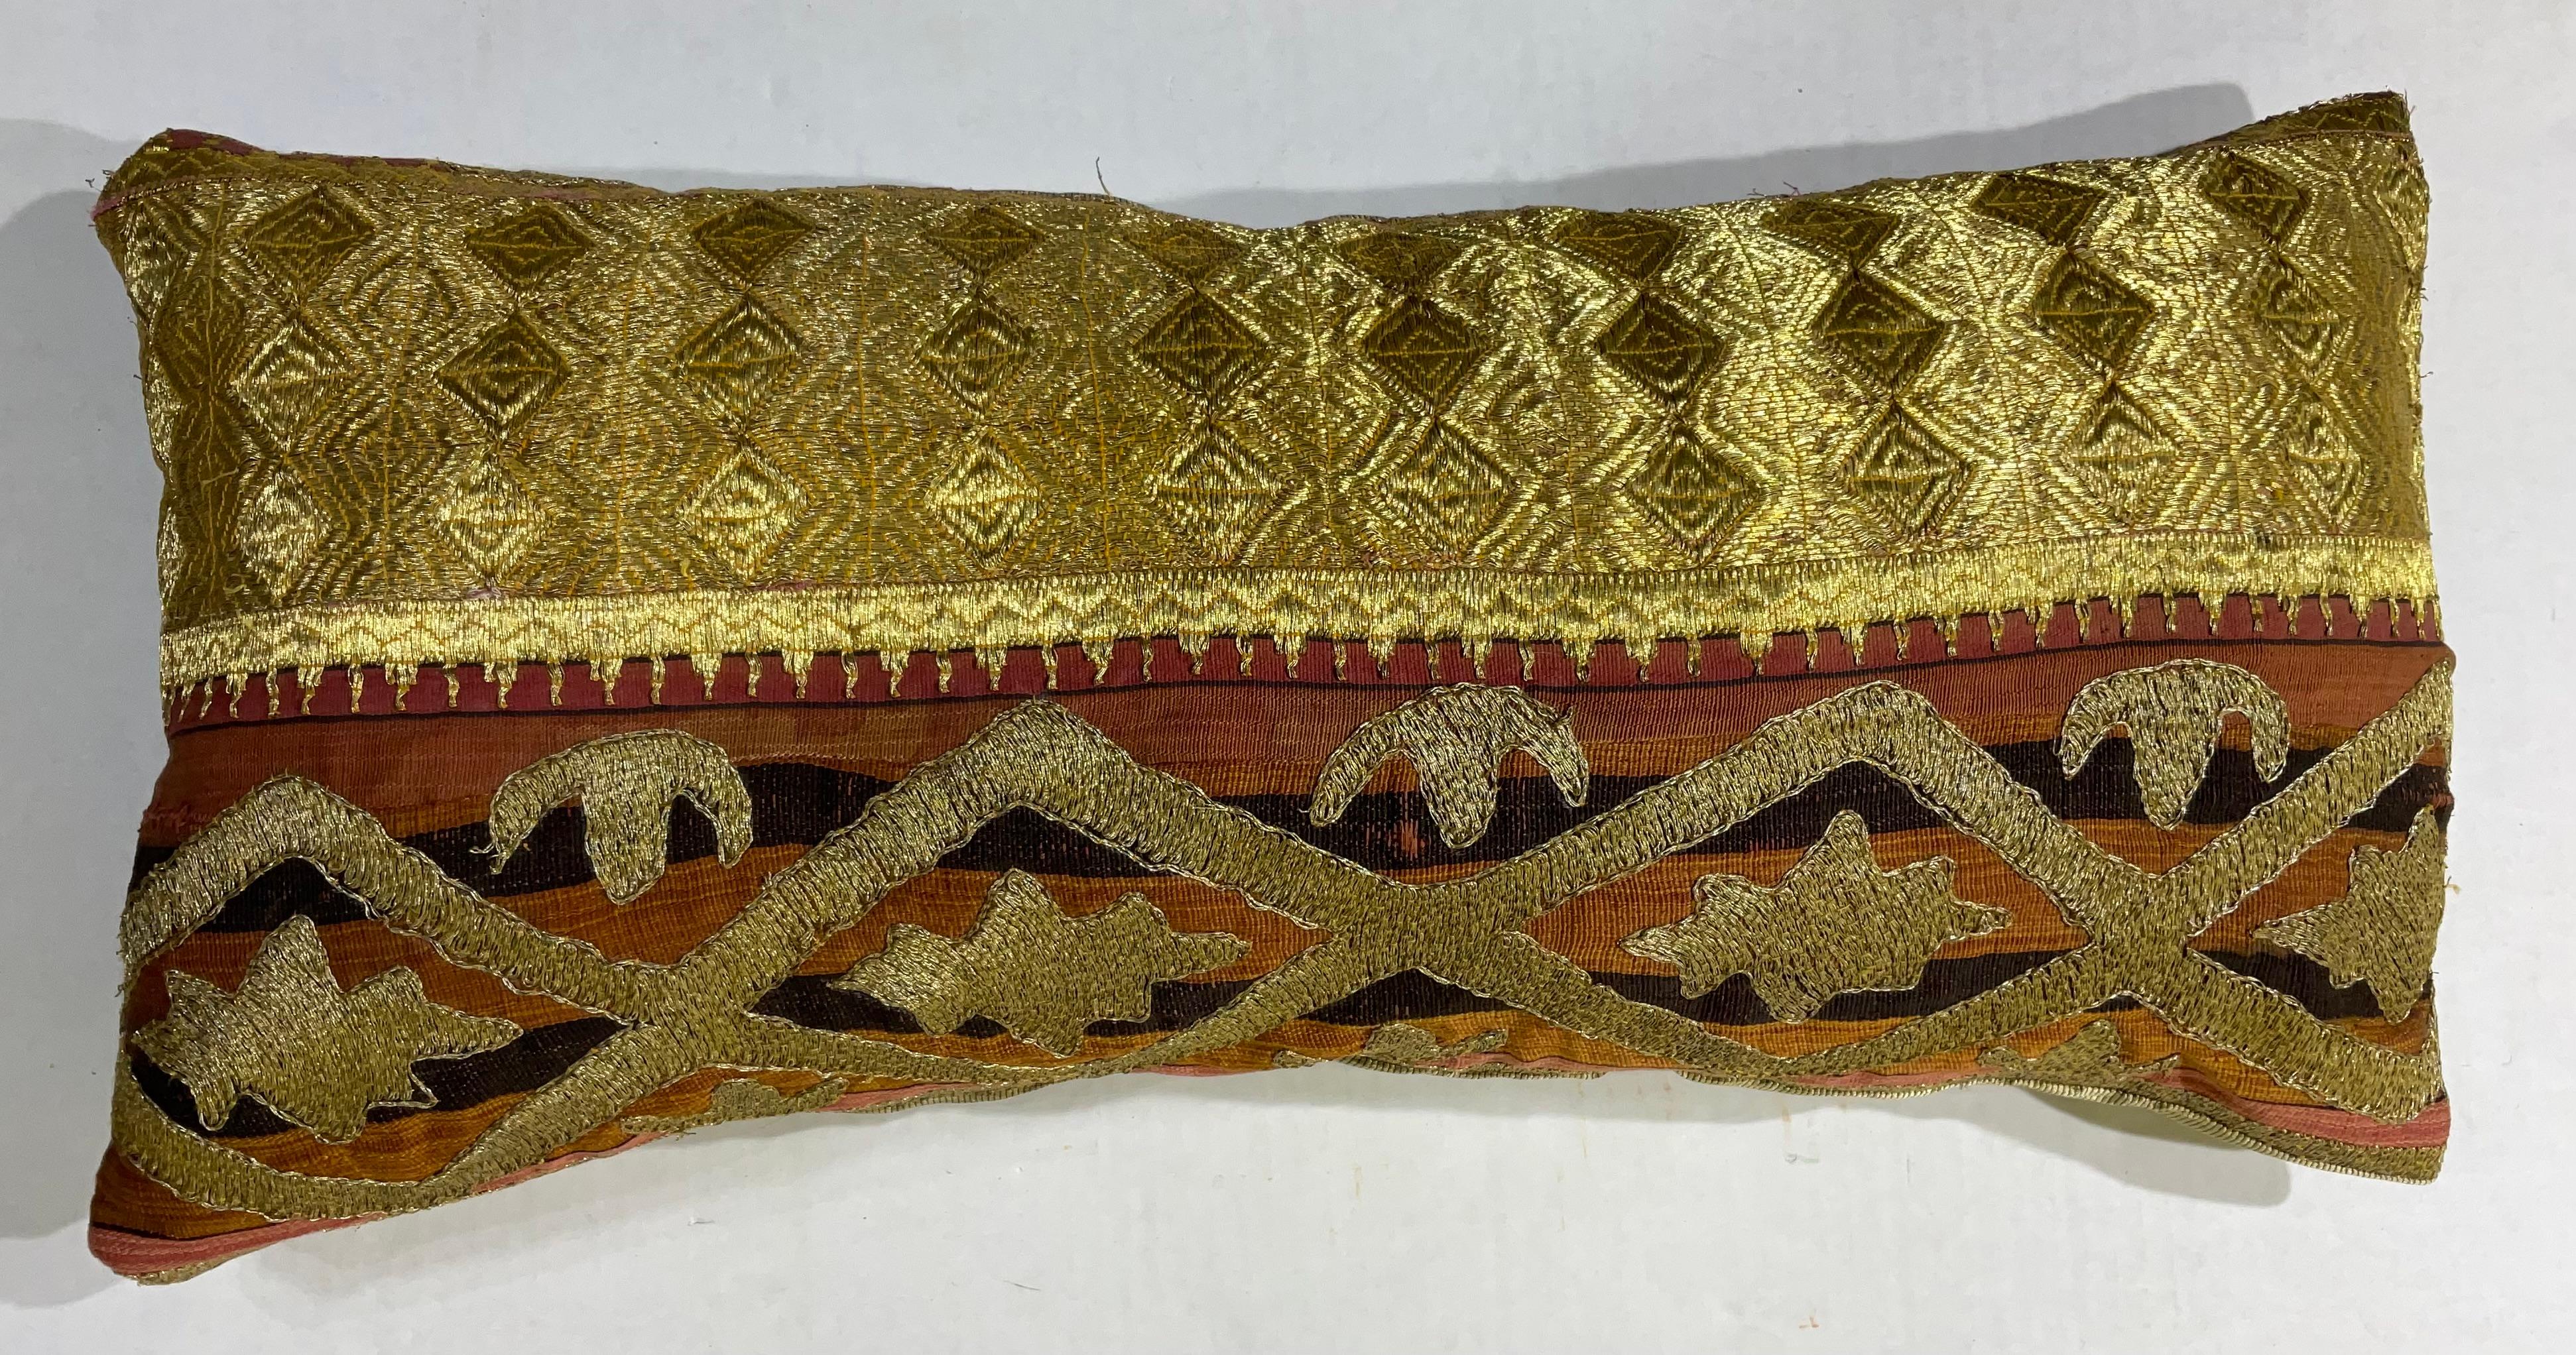 Exceptional pillow made of gold metallic thread embroidery on cotton foundation with beautiful artistic geometric motifs. Fine cotton backing. Salvaged from larger antique tribal textile.
Had some professional repair see photo.